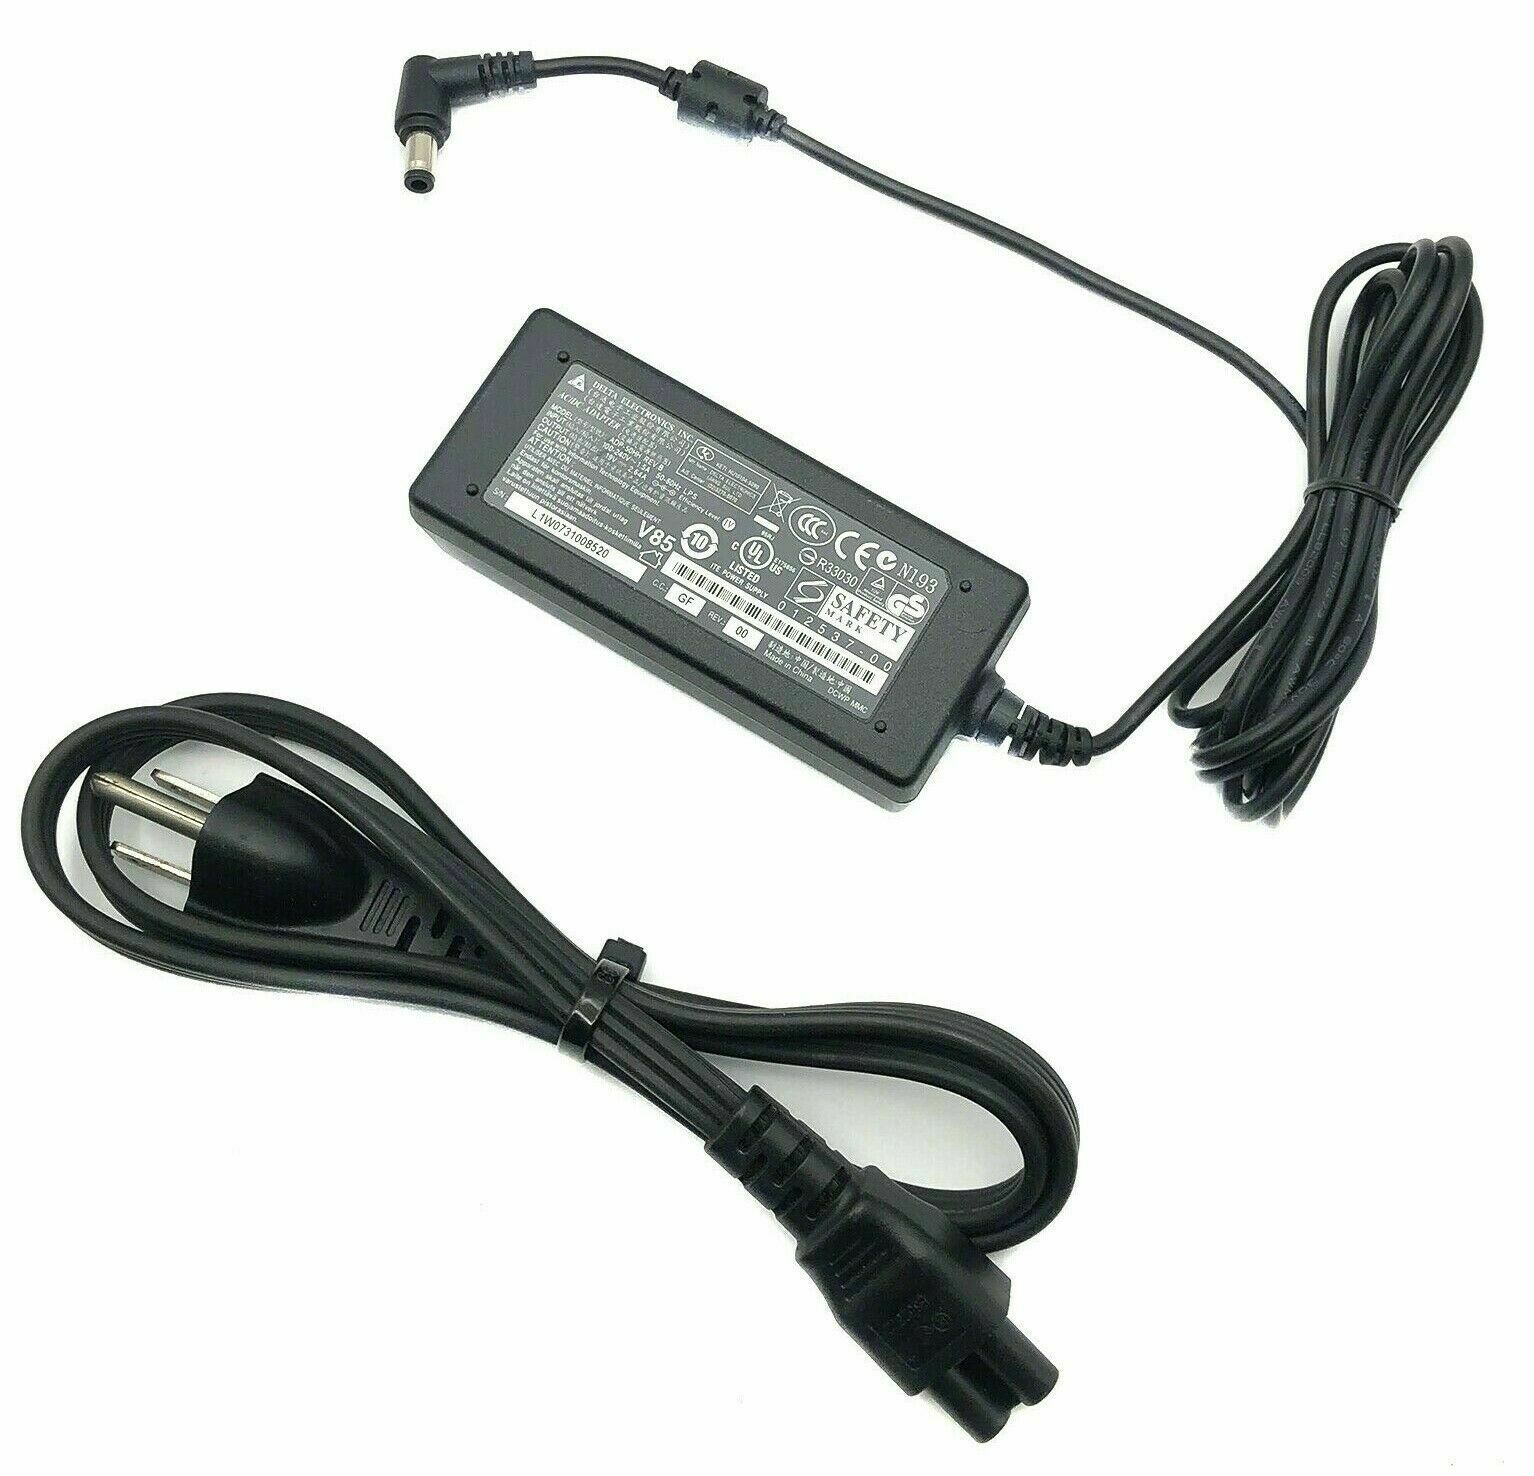 Genuine Delta AC Adapter For Motion J3400 J3500 J3600 Tablet Charger W/Cord OEM Compatible Brand: